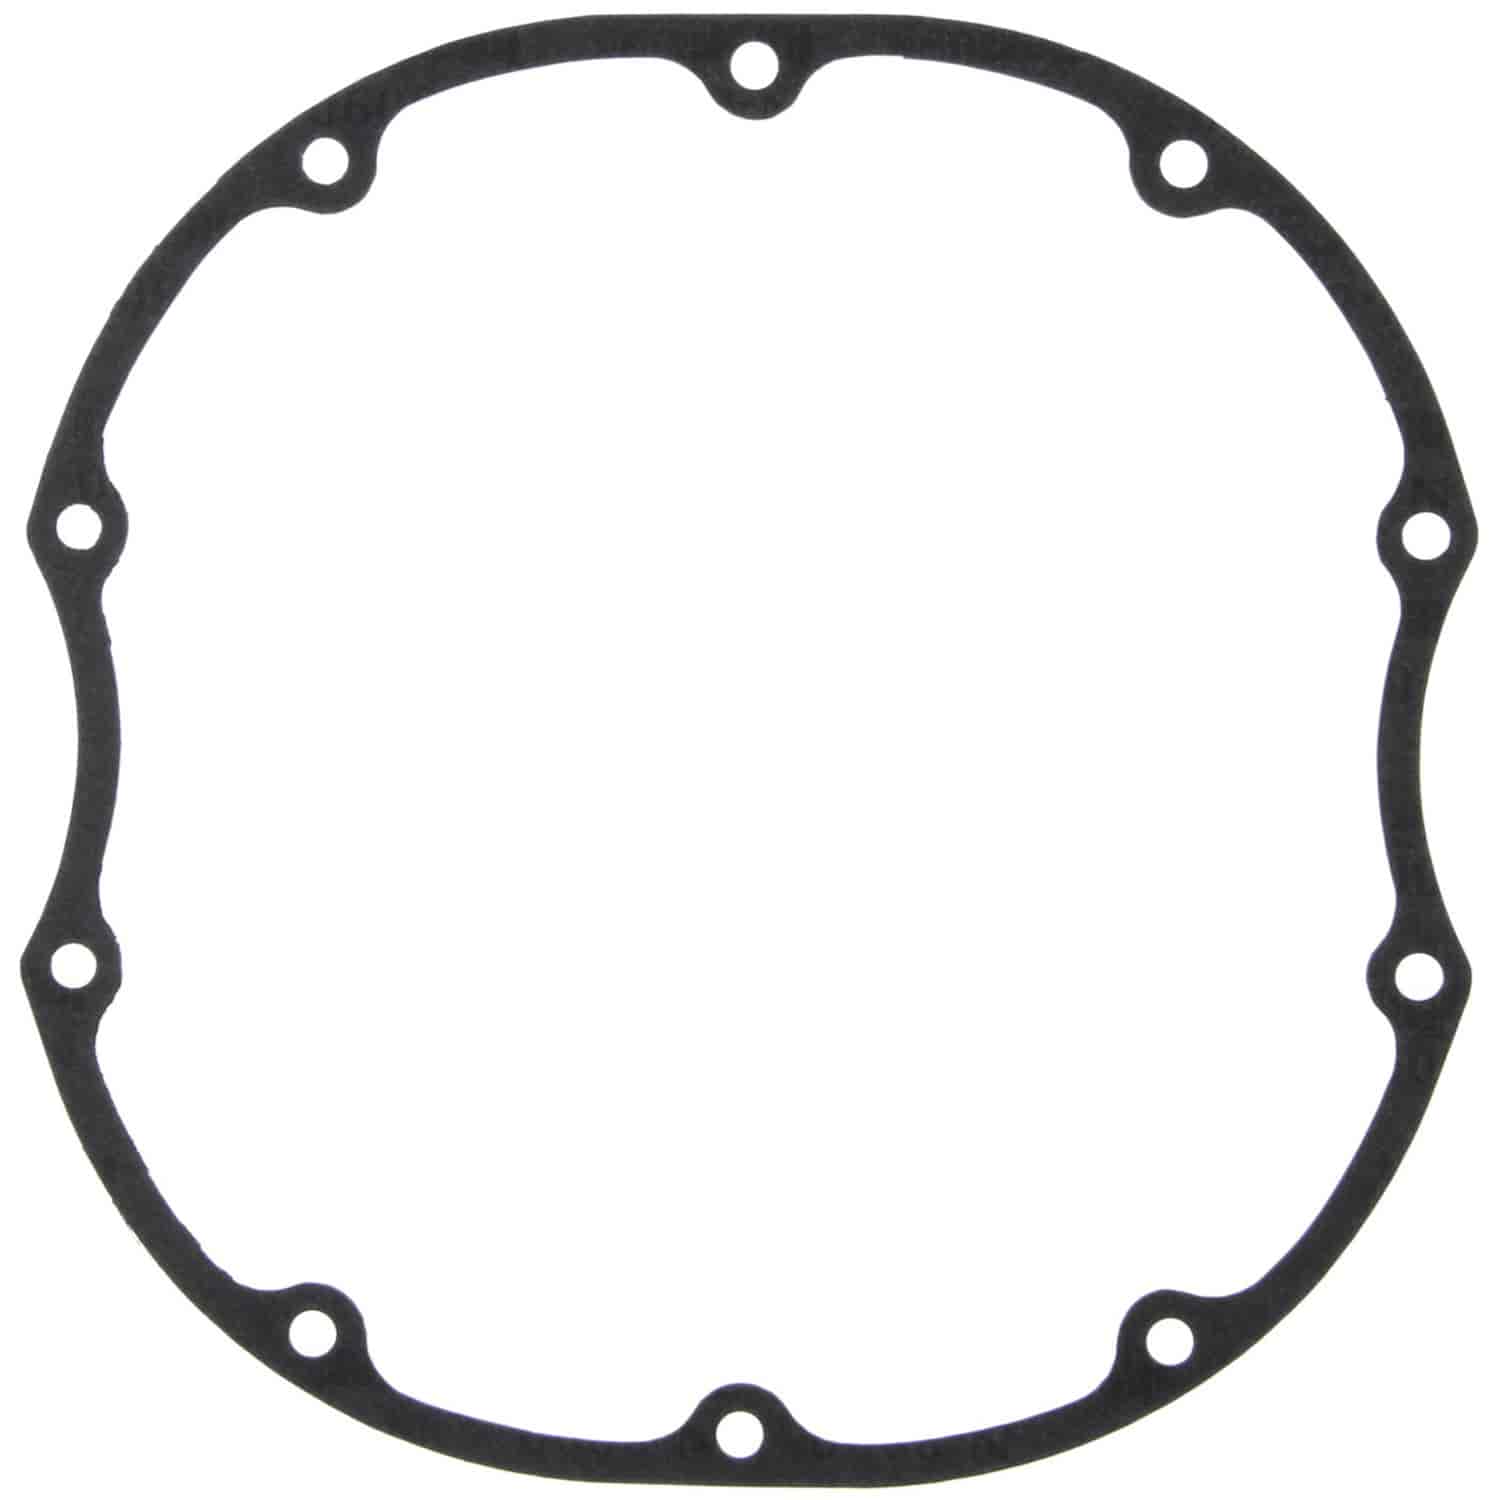 Axle Housing Cover Gasket Bui Cad Chev Olds